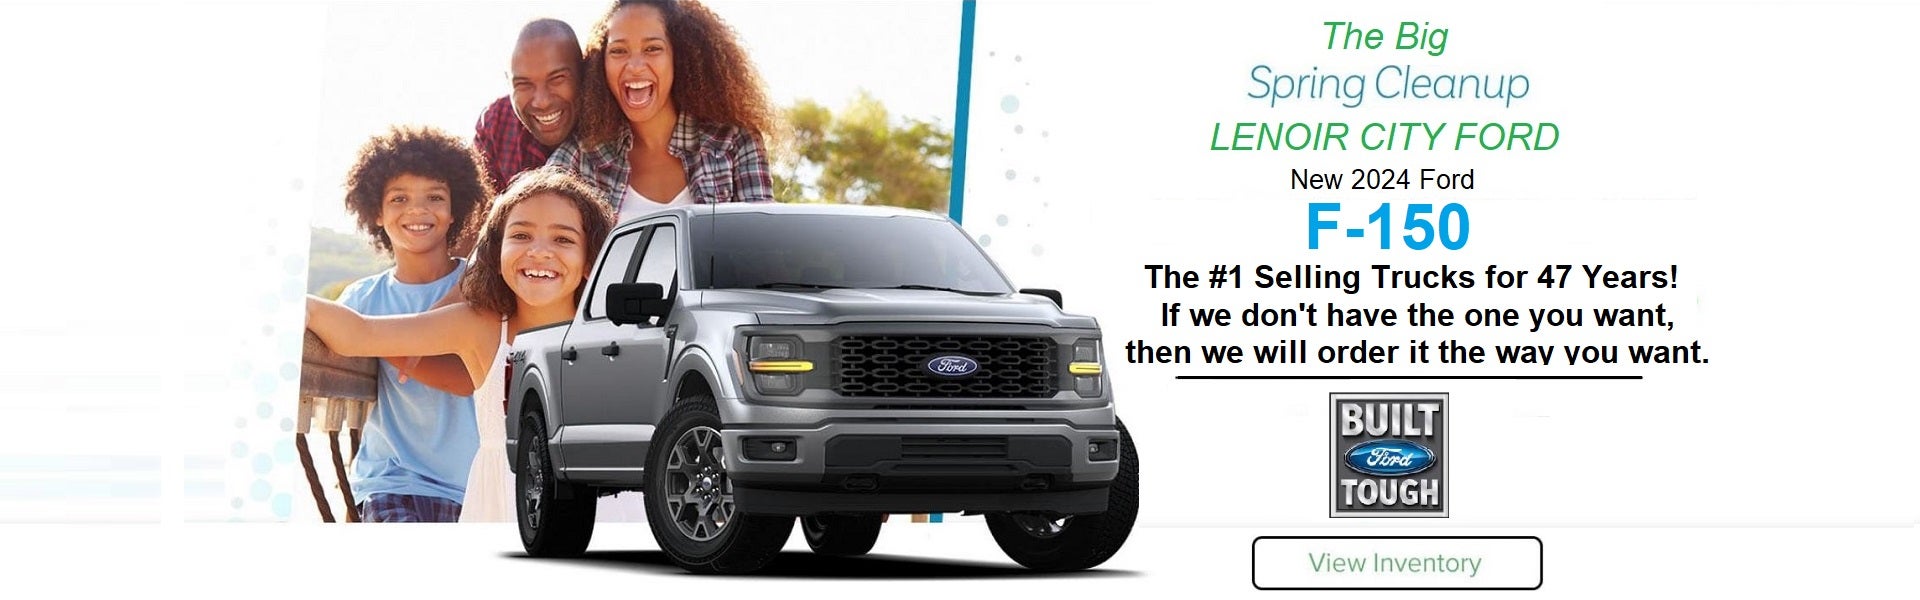 The #1 Selling Trucks in the world